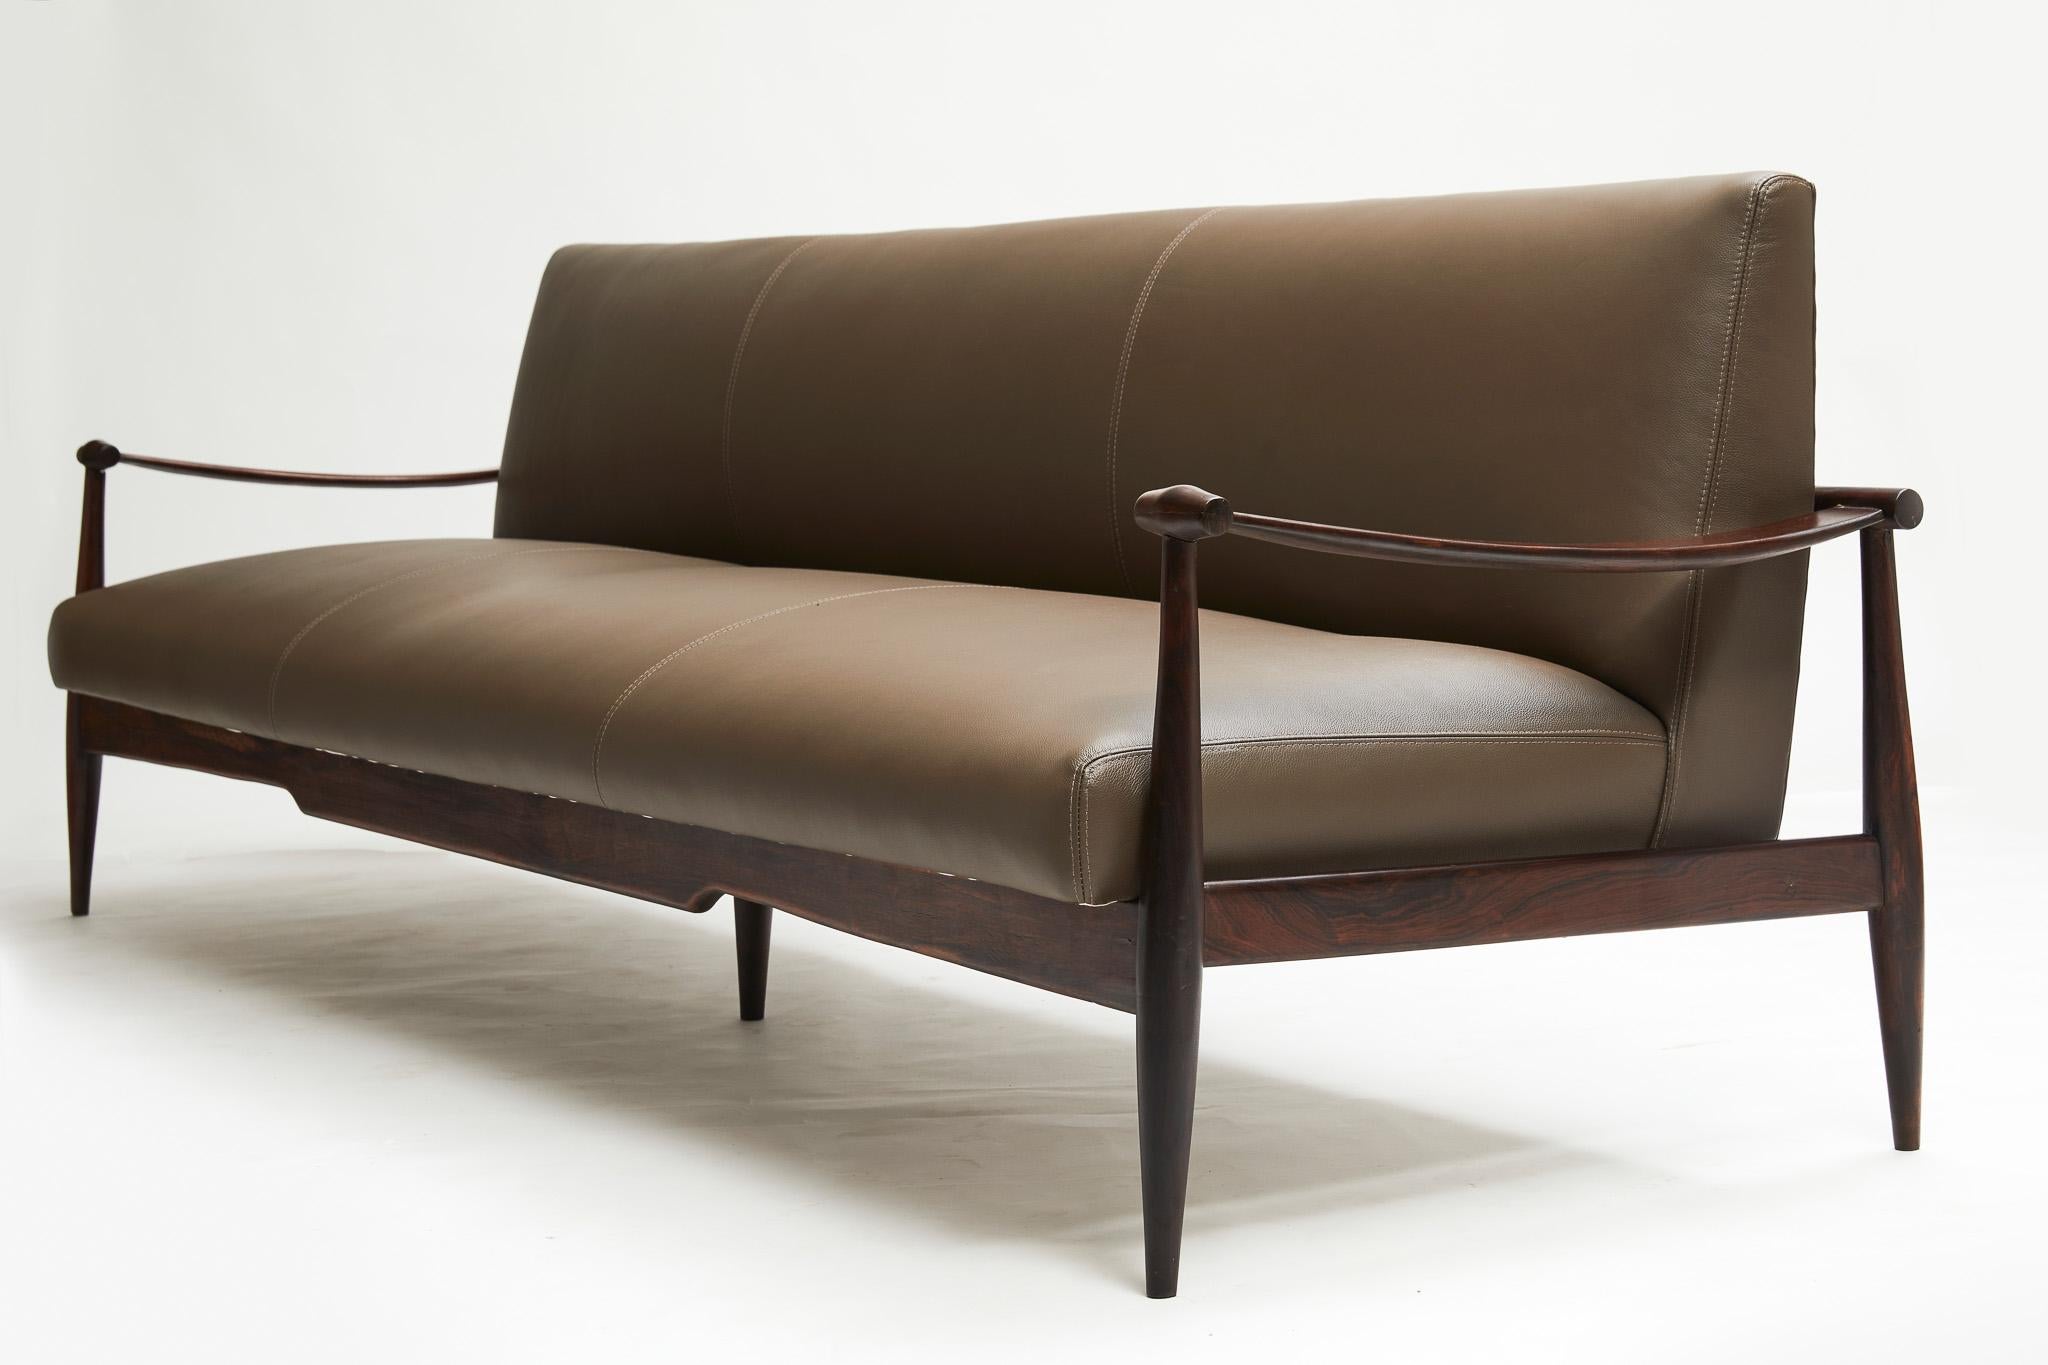 Hand-Carved Brazilian Modern Sofa in Hardwood & Brown Leather by Liceu De Artes 1960